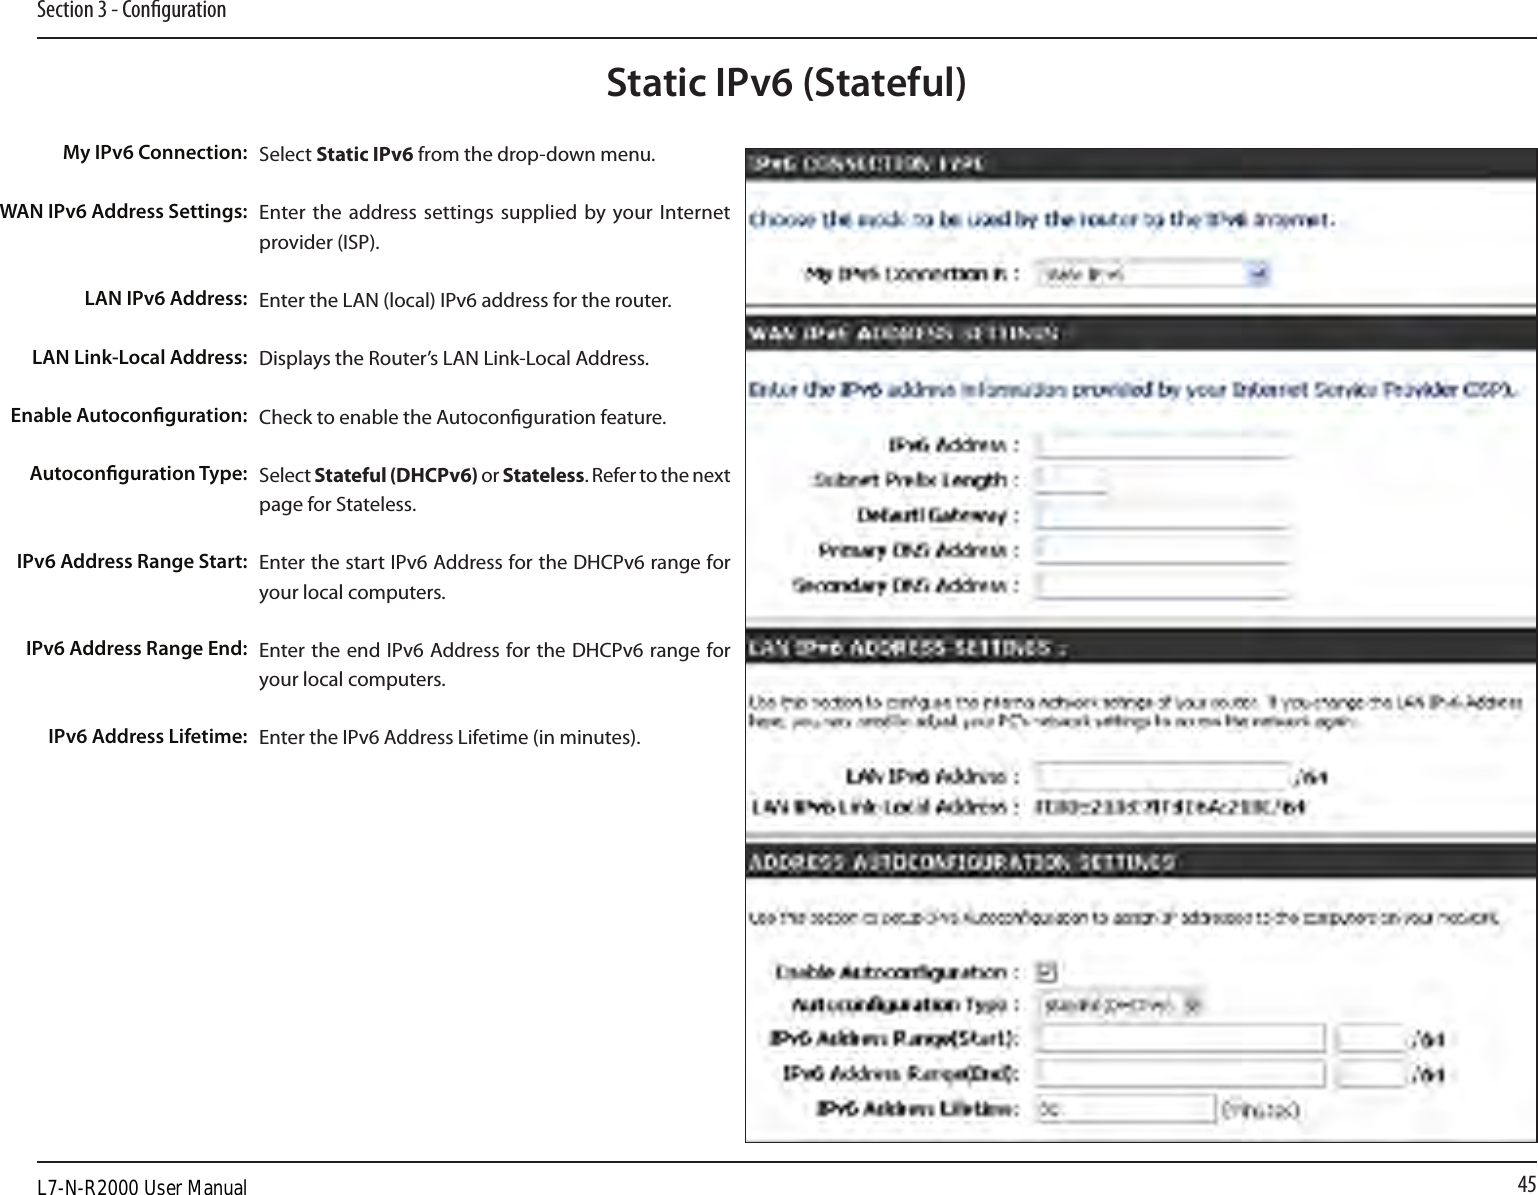 45Section 3 - CongurationStatic IPv6 (Stateful)Select Static IPv6 from the drop-down menu.Enter the address settings  supplied by your Internet provider (ISP). Enter the LAN (local) IPv6 address for the router. Displays the Router’s LAN Link-Local Address.Check to enable the Autoconguration feature.Select Stateful (DHCPv6) or Stateless. Refer to the next page for Stateless.Enter the start IPv6 Address for the DHCPv6 range for your local computers.Enter the end IPv6 Address for the DHCPv6 range for your local computers.Enter the IPv6 Address Lifetime (in minutes).My IPv6 Connection:WAN IPv6 Address Settings:LAN IPv6 Address:LAN Link-Local Address:Enable Autoconguration:Autoconguration Type:IPv6 Address Range Start:IPv6 Address Range End:IPv6 Address Lifetime:L7-N-R2000 User Manual